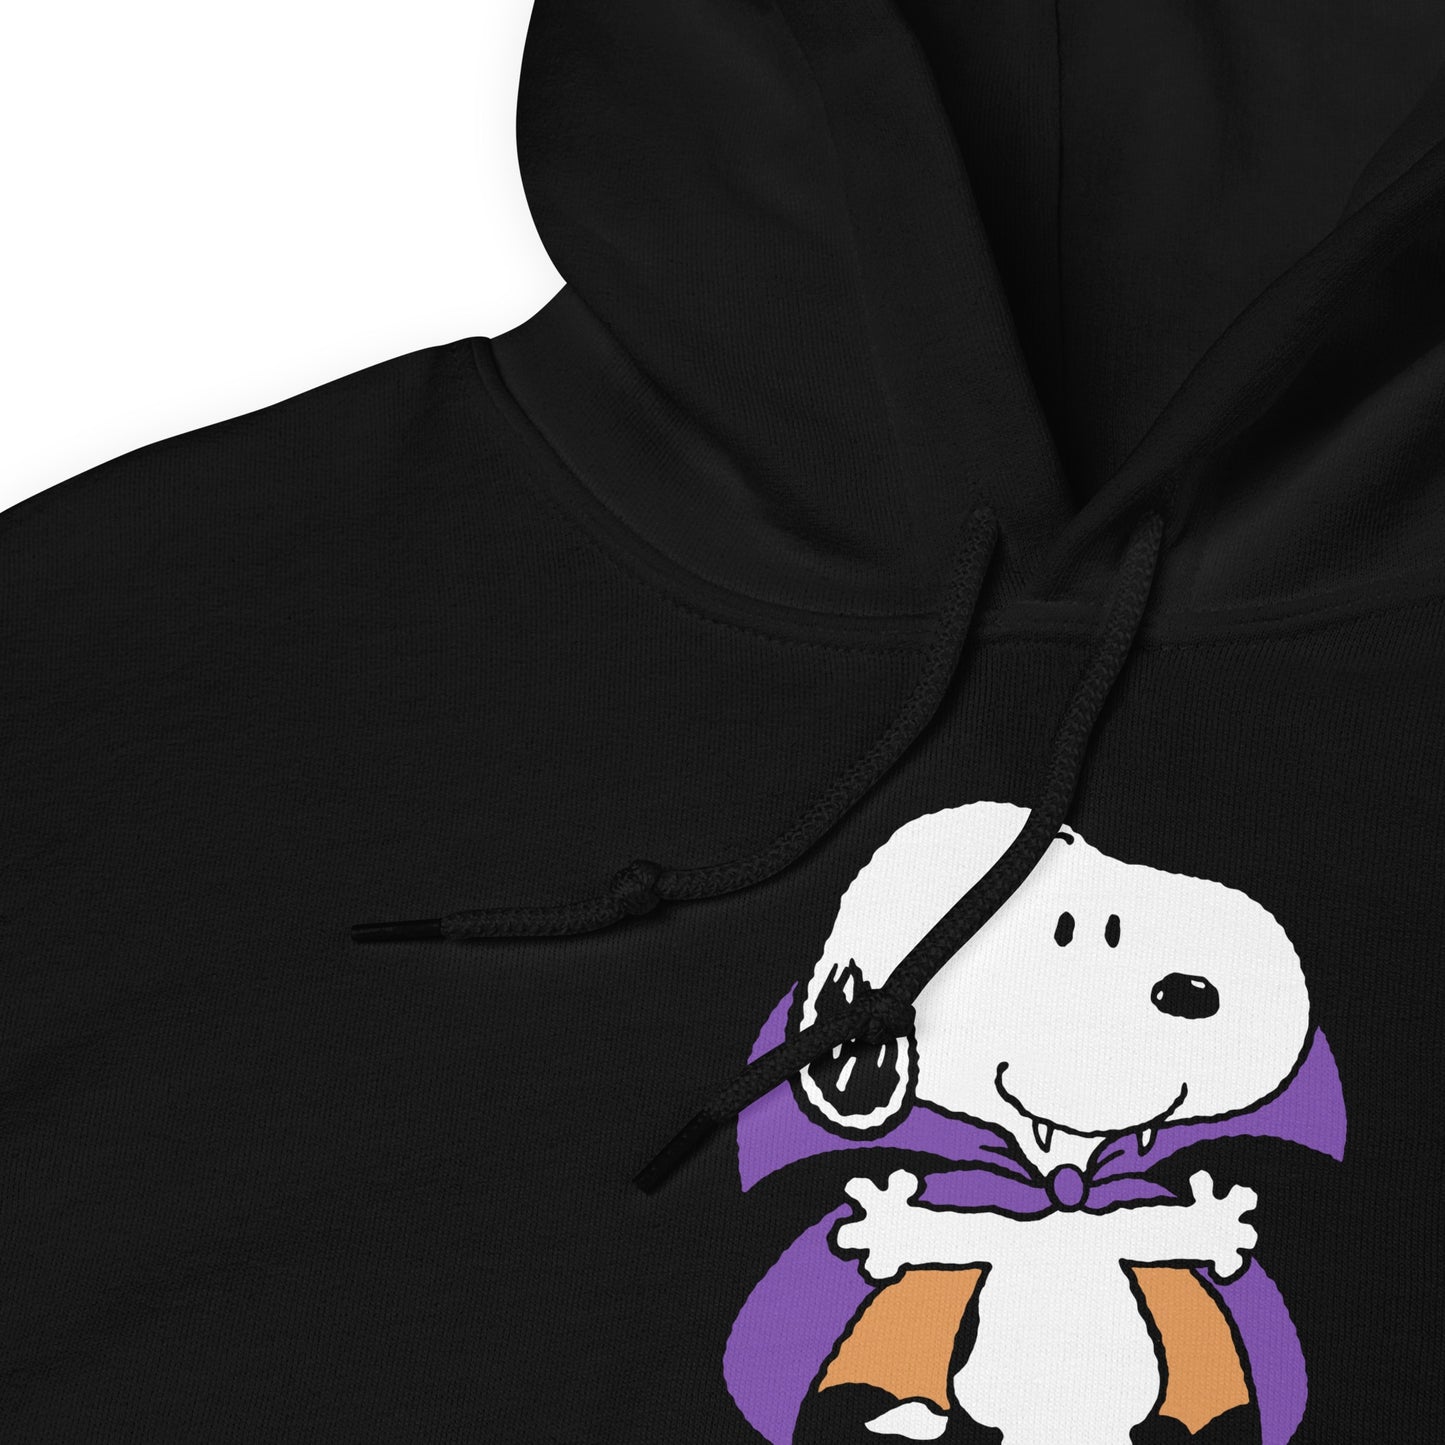 Snoopy Happiness Is Halloween Adult Hoodie